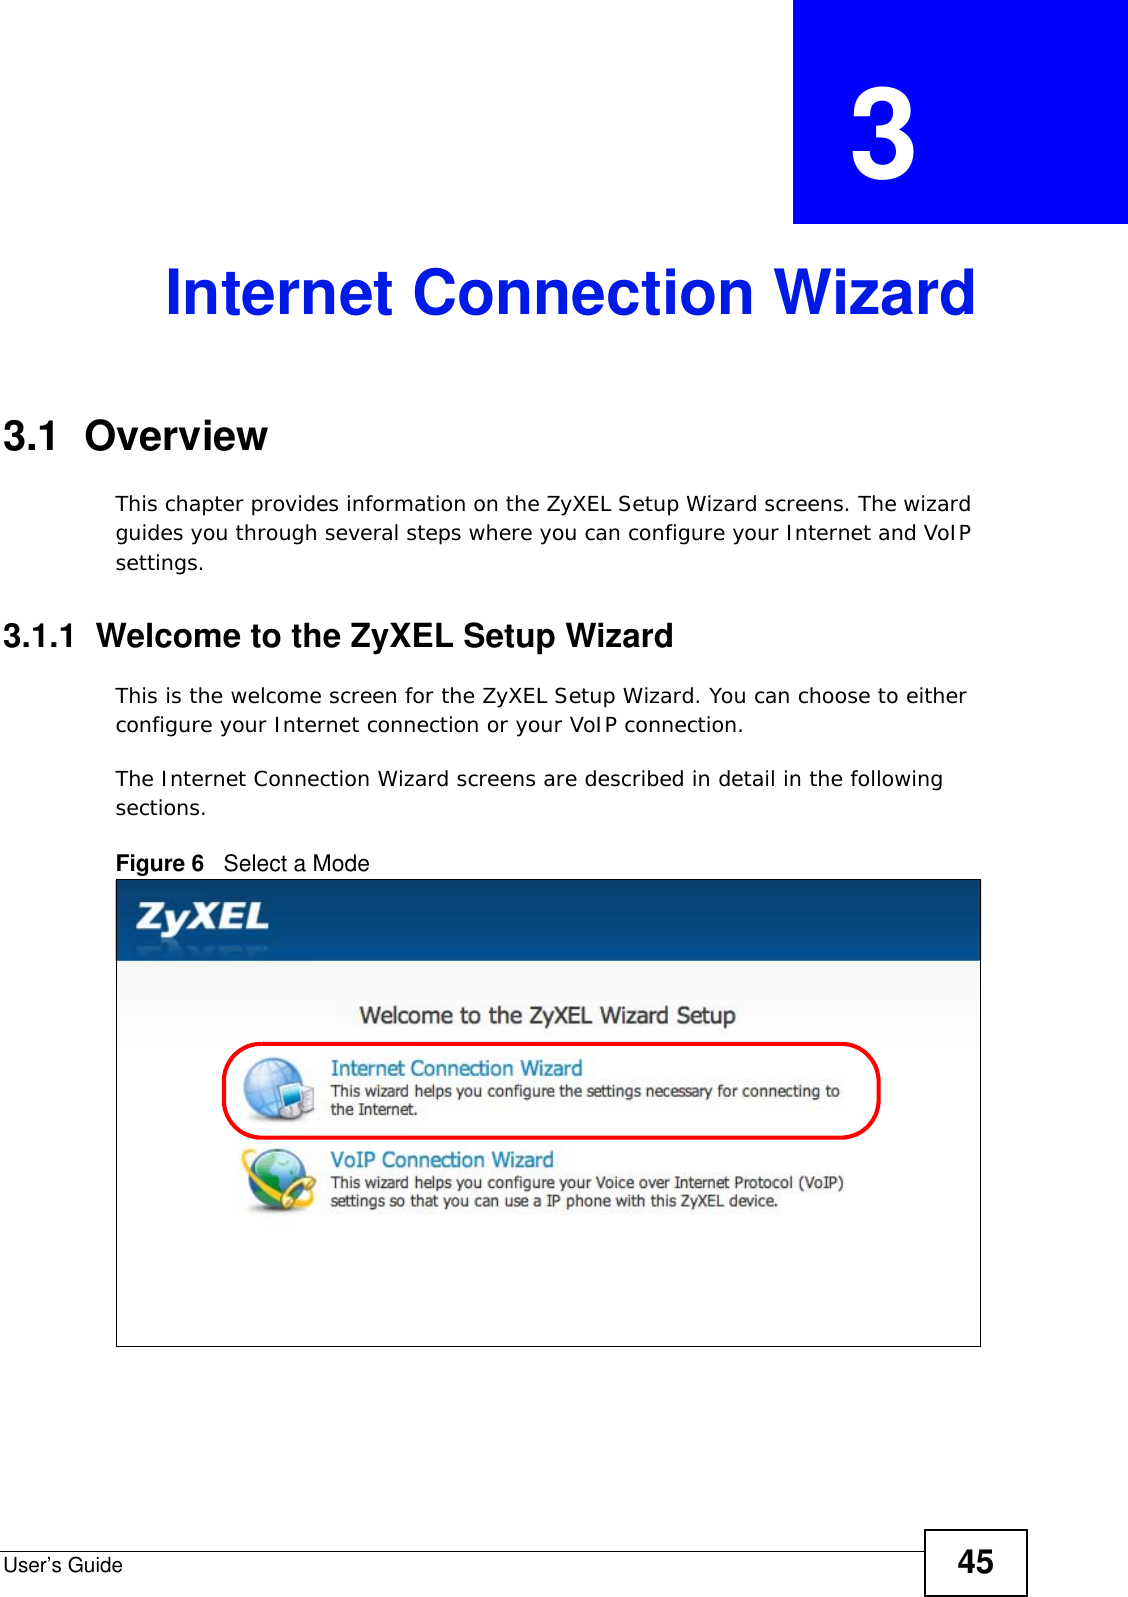 User’s Guide 45CHAPTER  3 Internet Connection Wizard3.1  OverviewThis chapter provides information on the ZyXEL Setup Wizard screens. The wizard guides you through several steps where you can configure your Internet and VoIP settings.3.1.1  Welcome to the ZyXEL Setup WizardThis is the welcome screen for the ZyXEL Setup Wizard. You can choose to either configure your Internet connection or your VoIP connection.The Internet Connection Wizard screens are described in detail in the following sections.Figure 6   Select a Mode